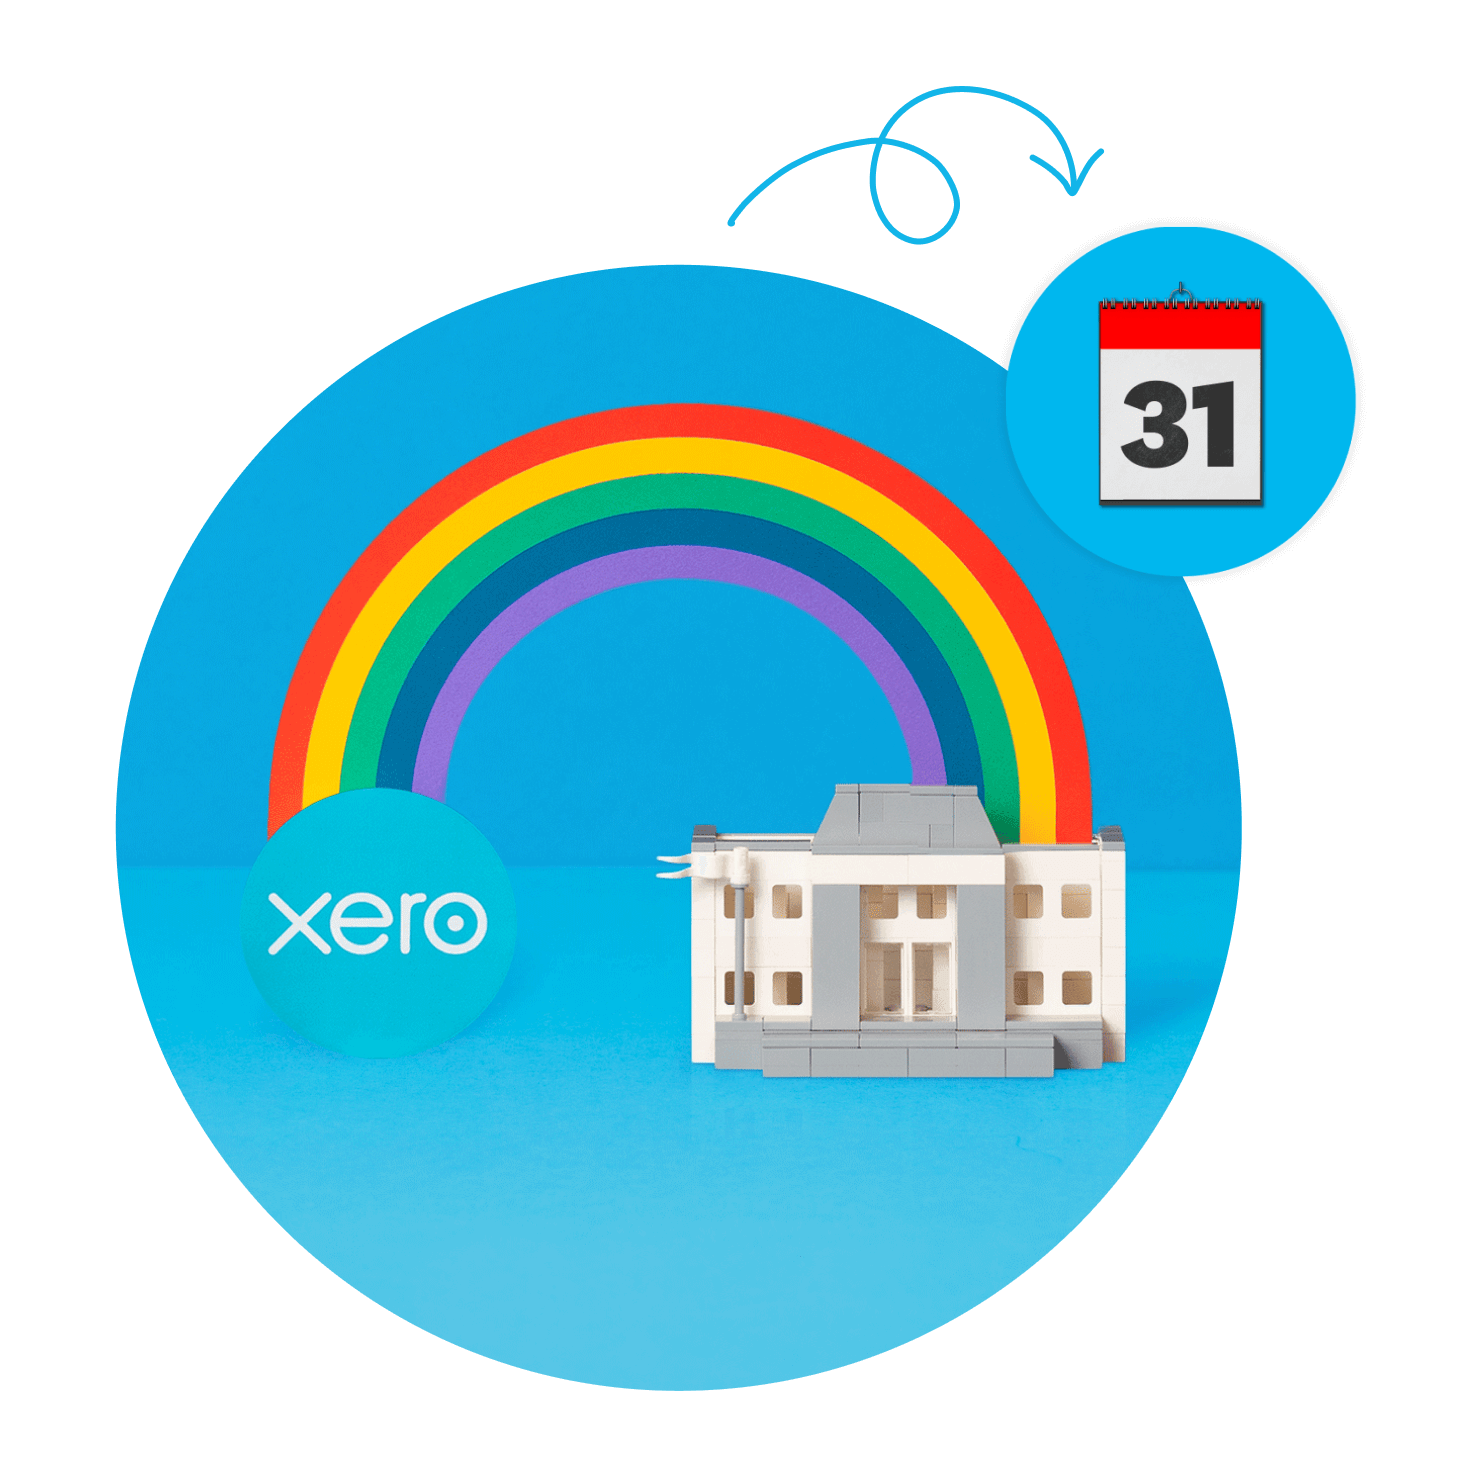 Xero has e-invoicing built in, so you’re ready to send e-invoices to the government departments you do business with.